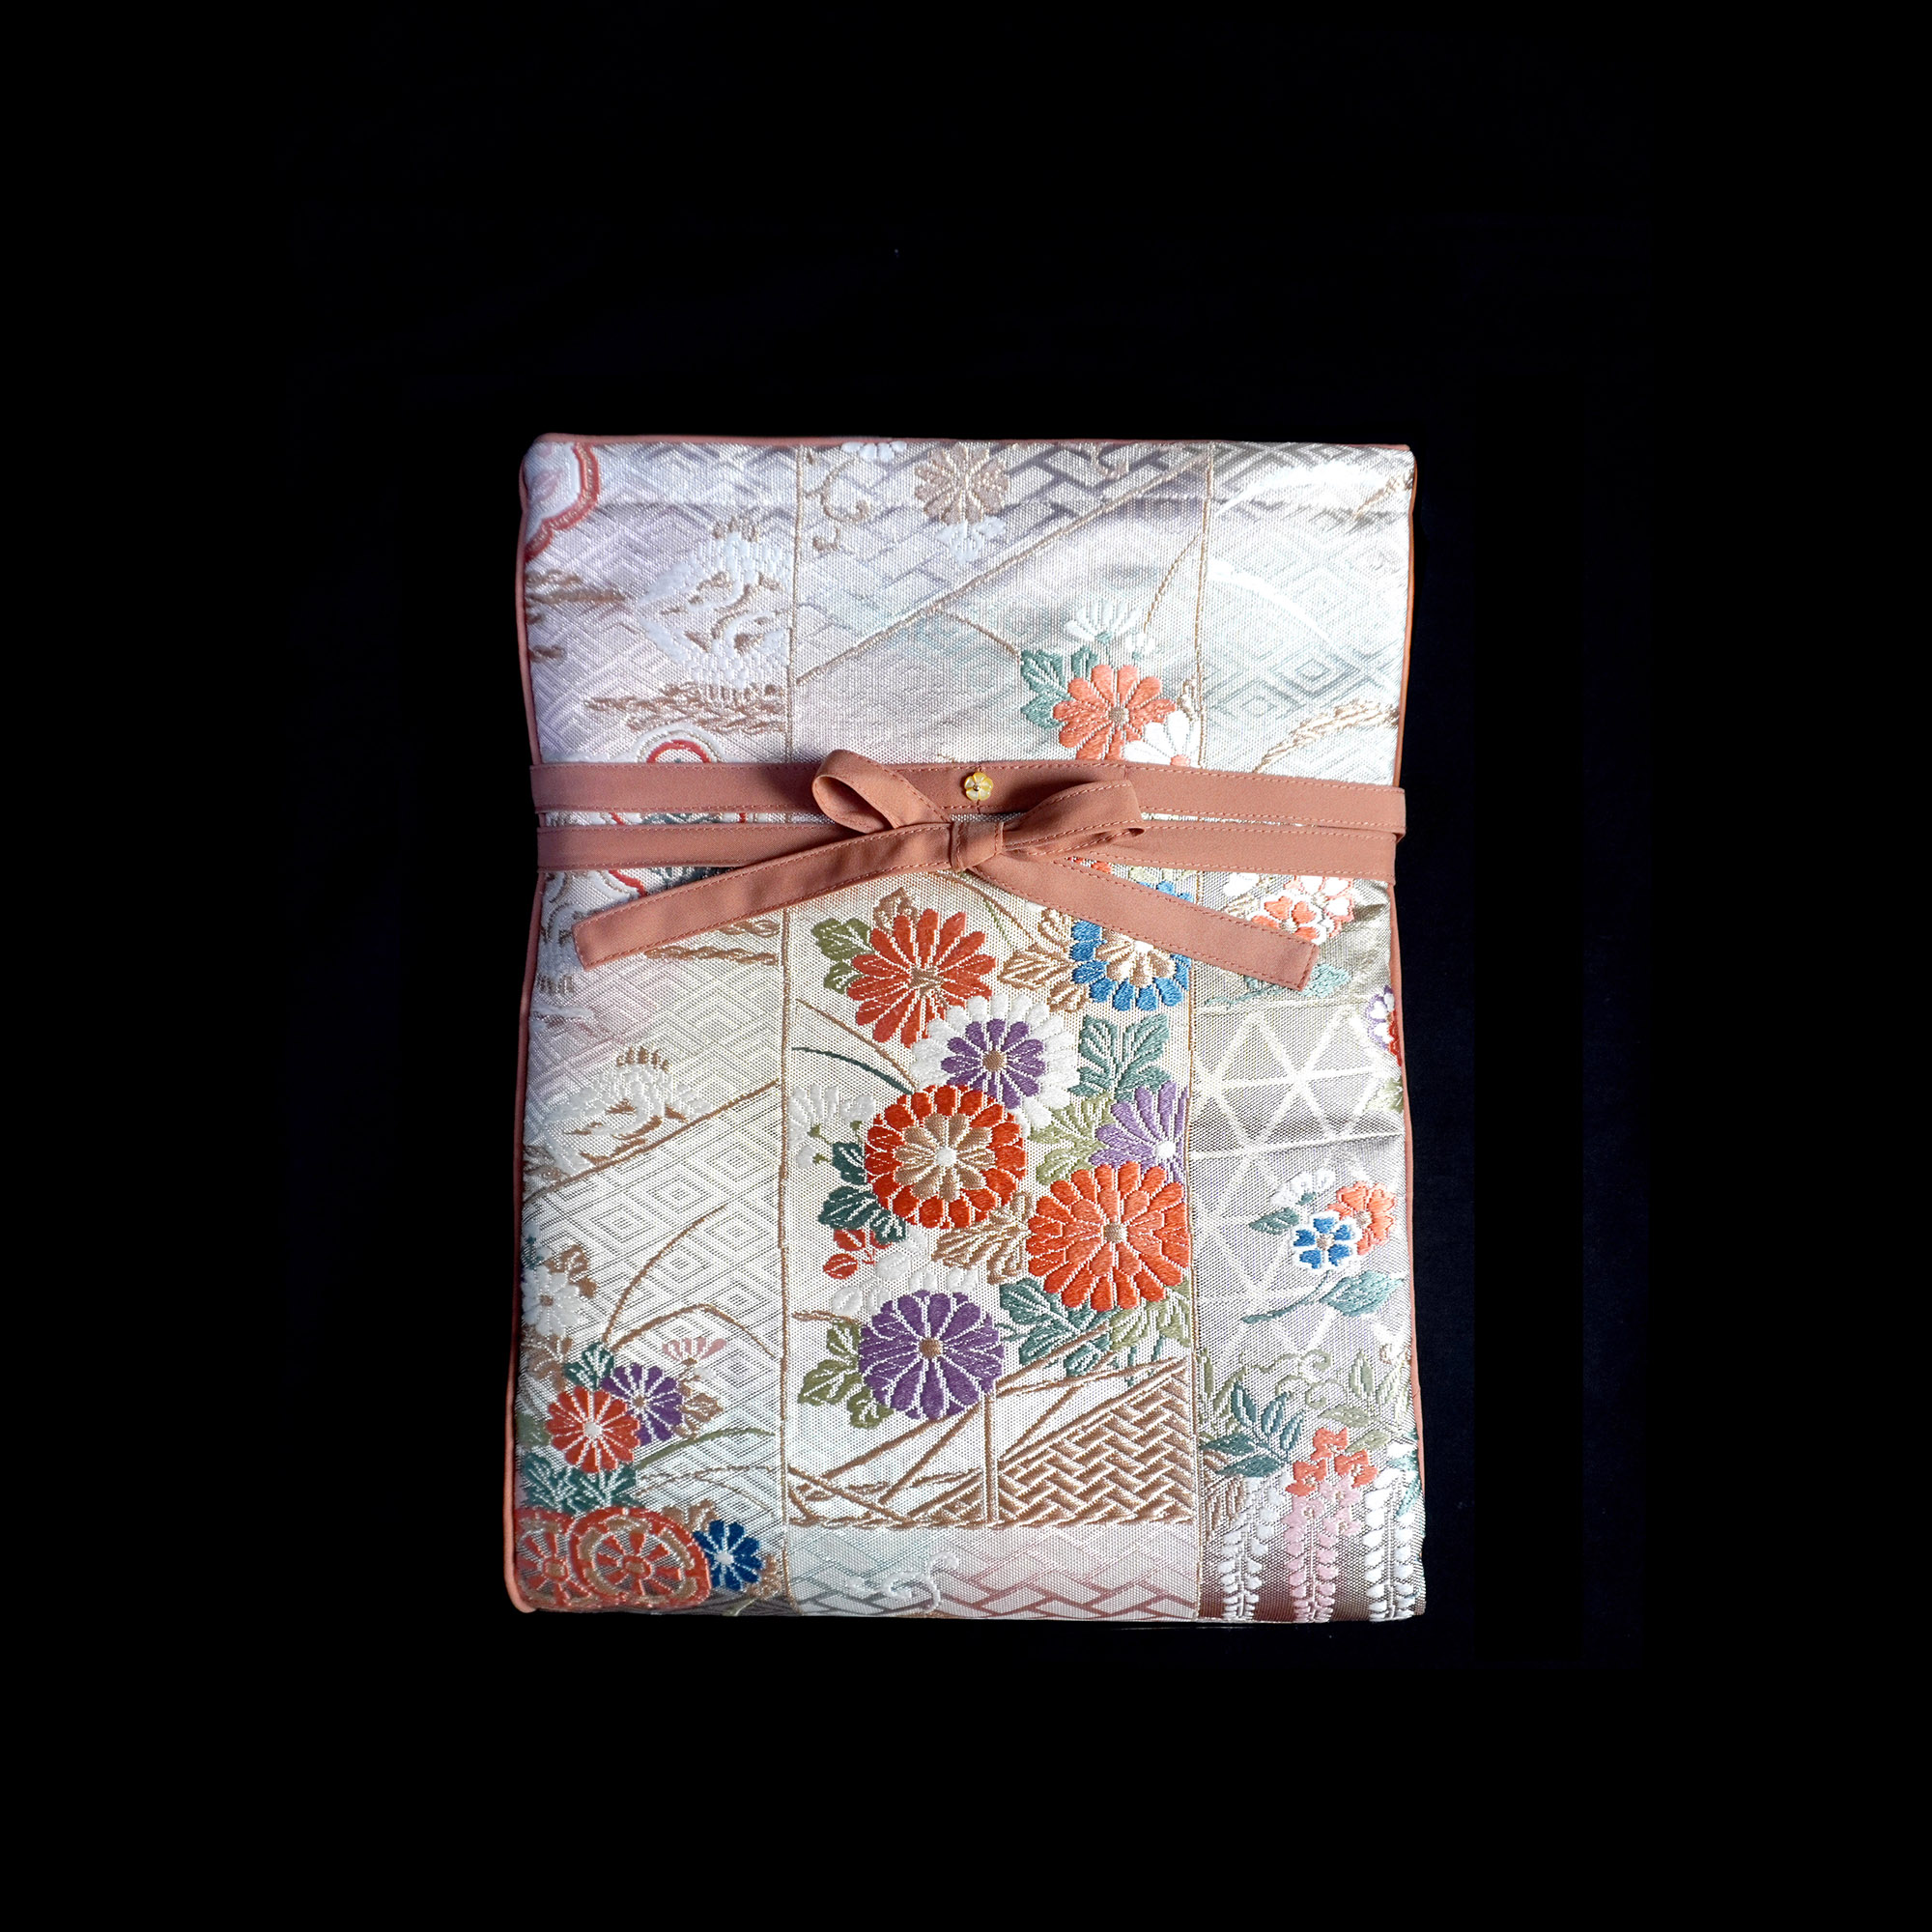 GoldenHarmony" - Premium Silk Qin Bag with Antique Brocade Fabric,  Exquisite Handcrafted Chinese Qin Cover